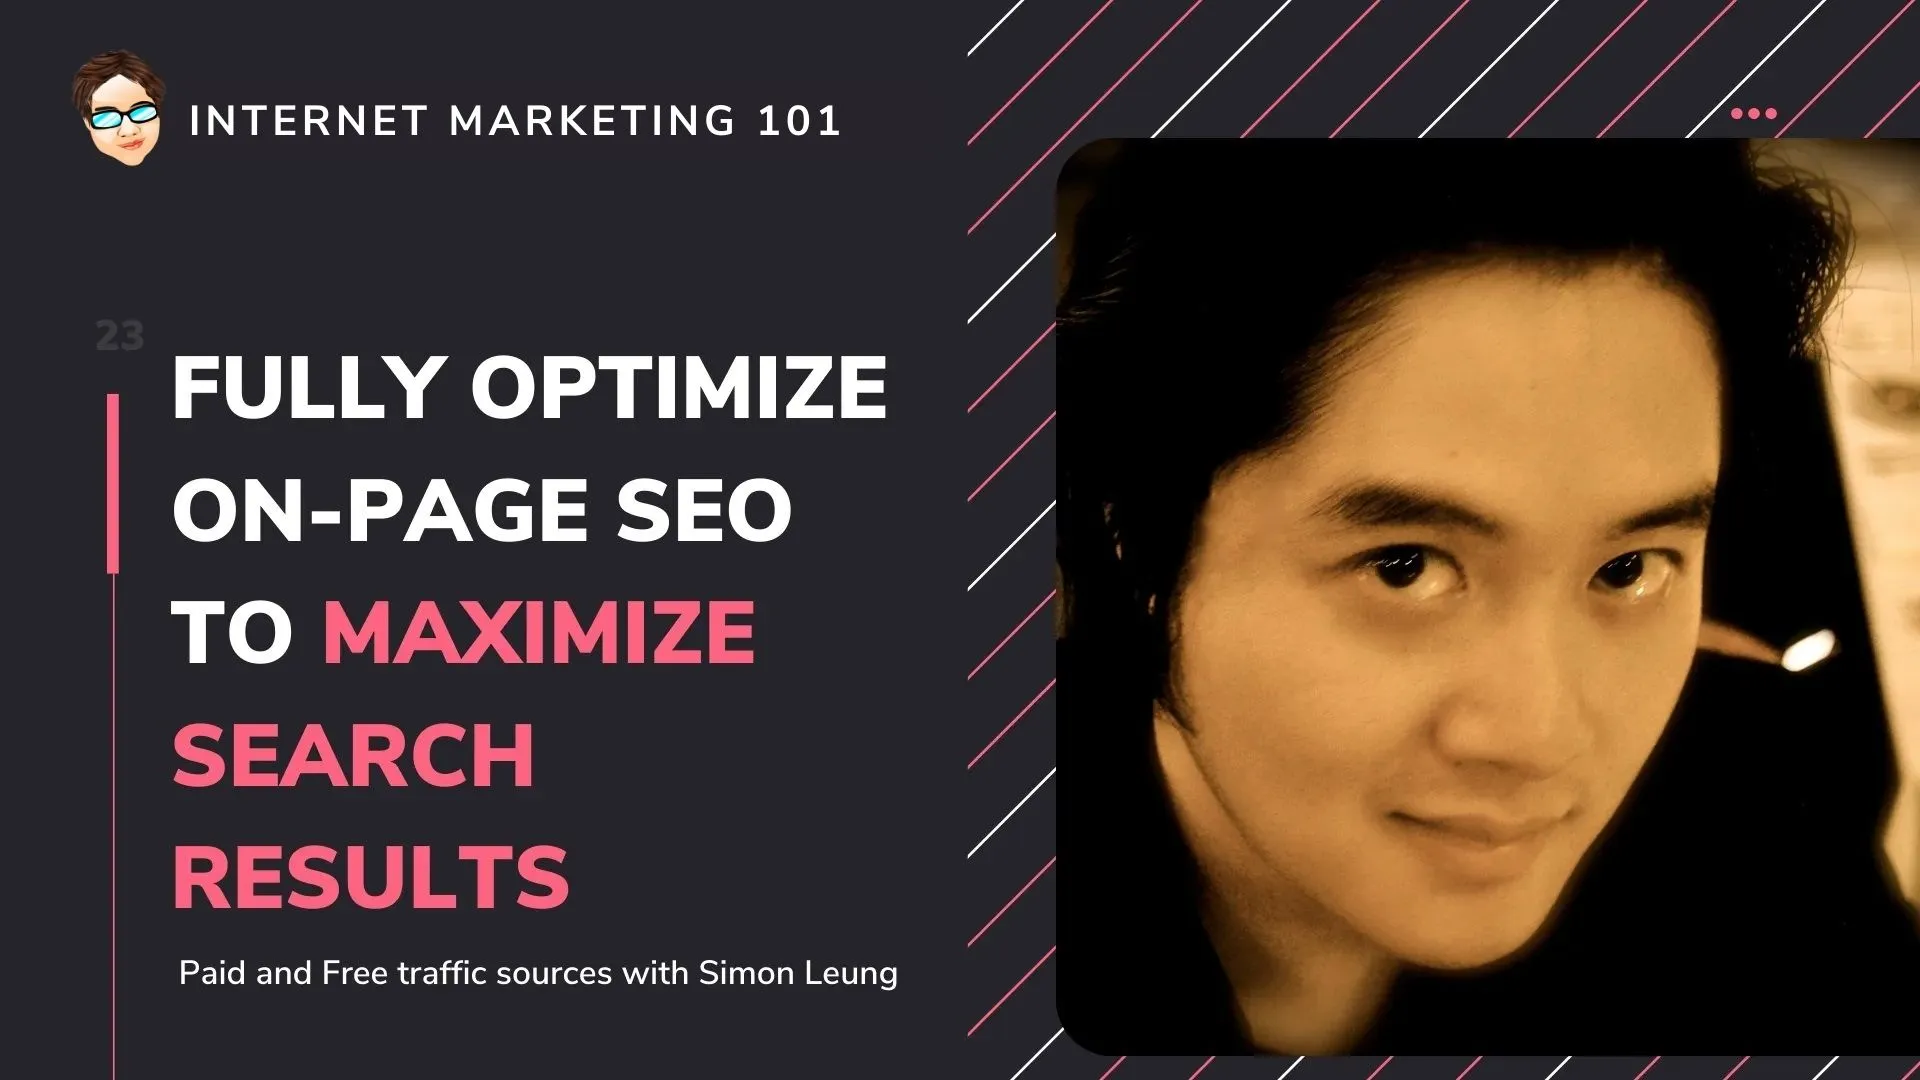 Internet Marketing 101 - Fully Optimize On-Page SEO To Maximize Search Results (Simon Leung)